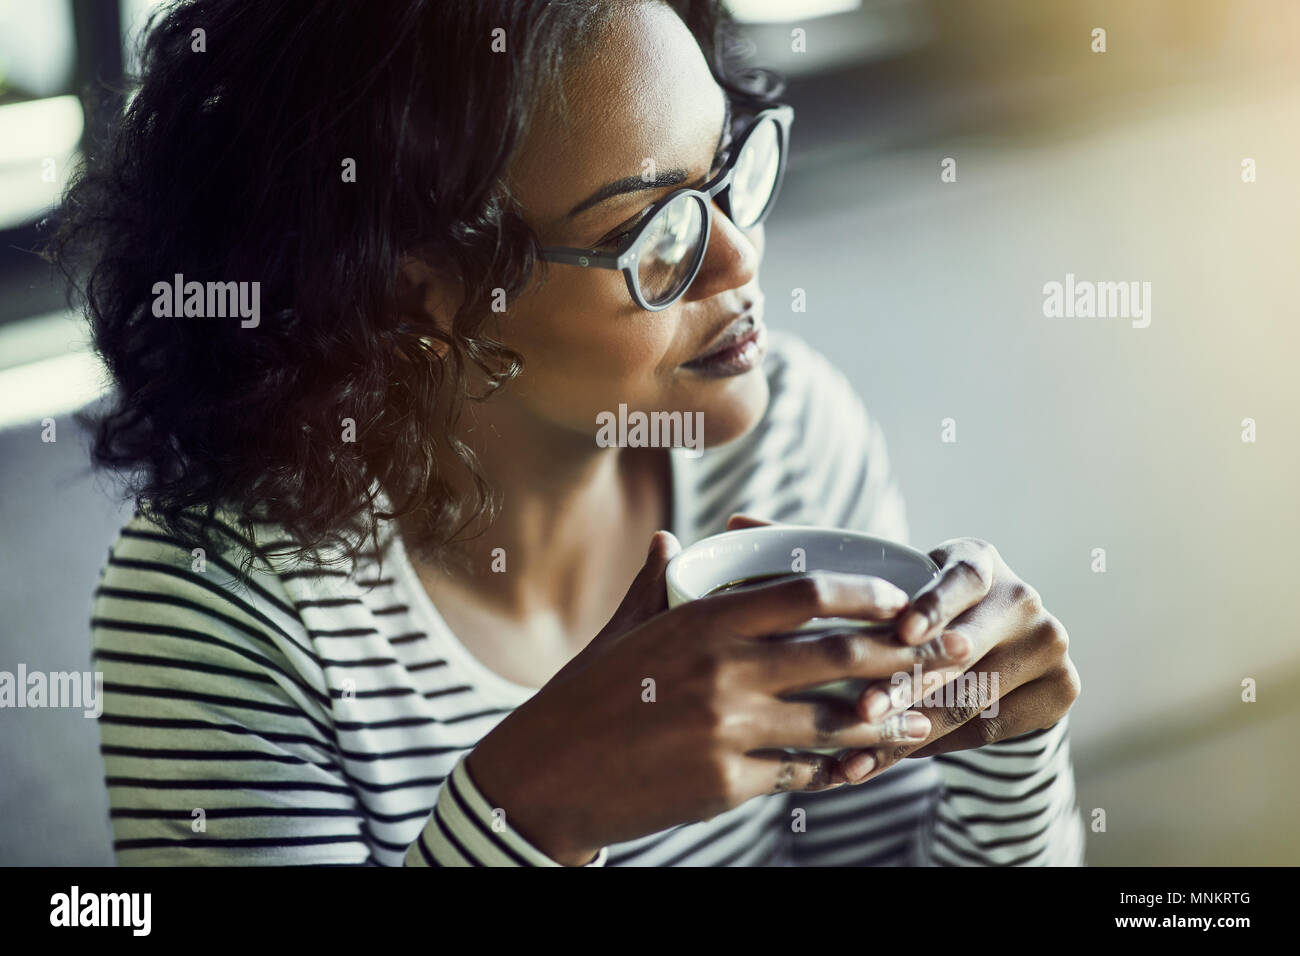 Smiling young African woman wearing glasses sitting alone at a cafe table deep in thought while drinking a fresh cup of coffee Stock Photo